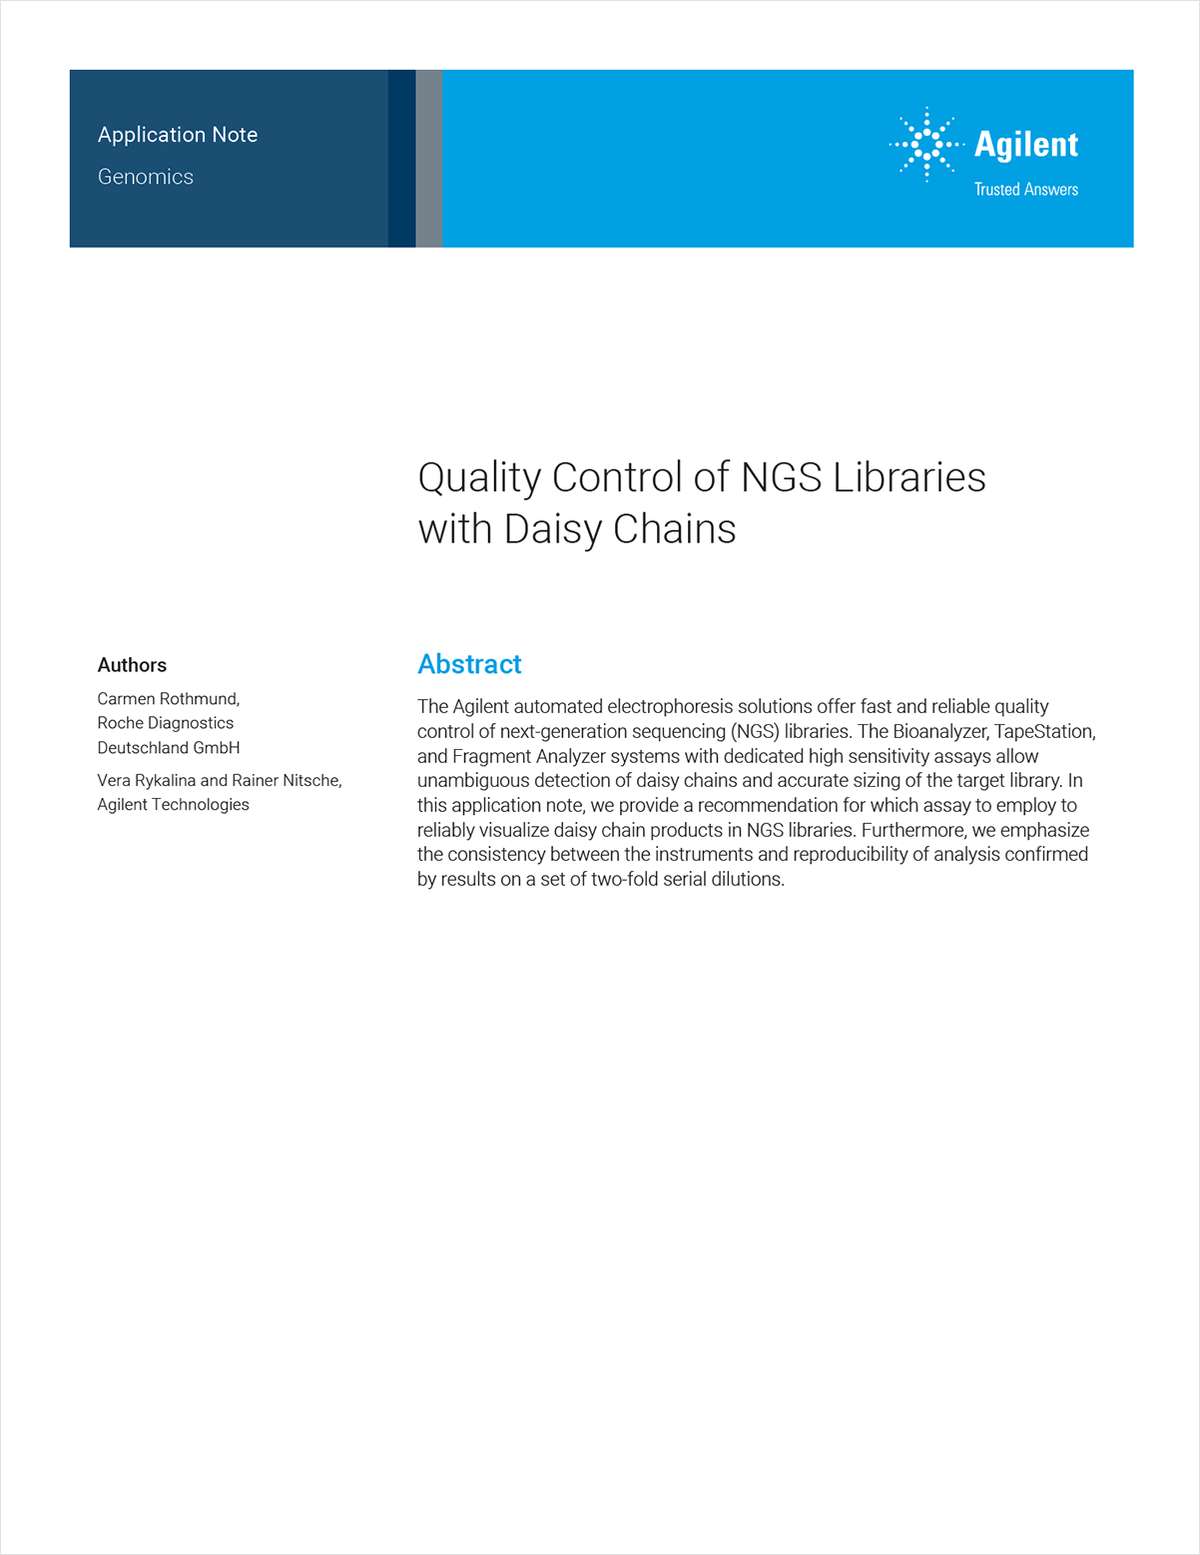 Quality Control of NGS Libraries with Daisy Chain Molecules